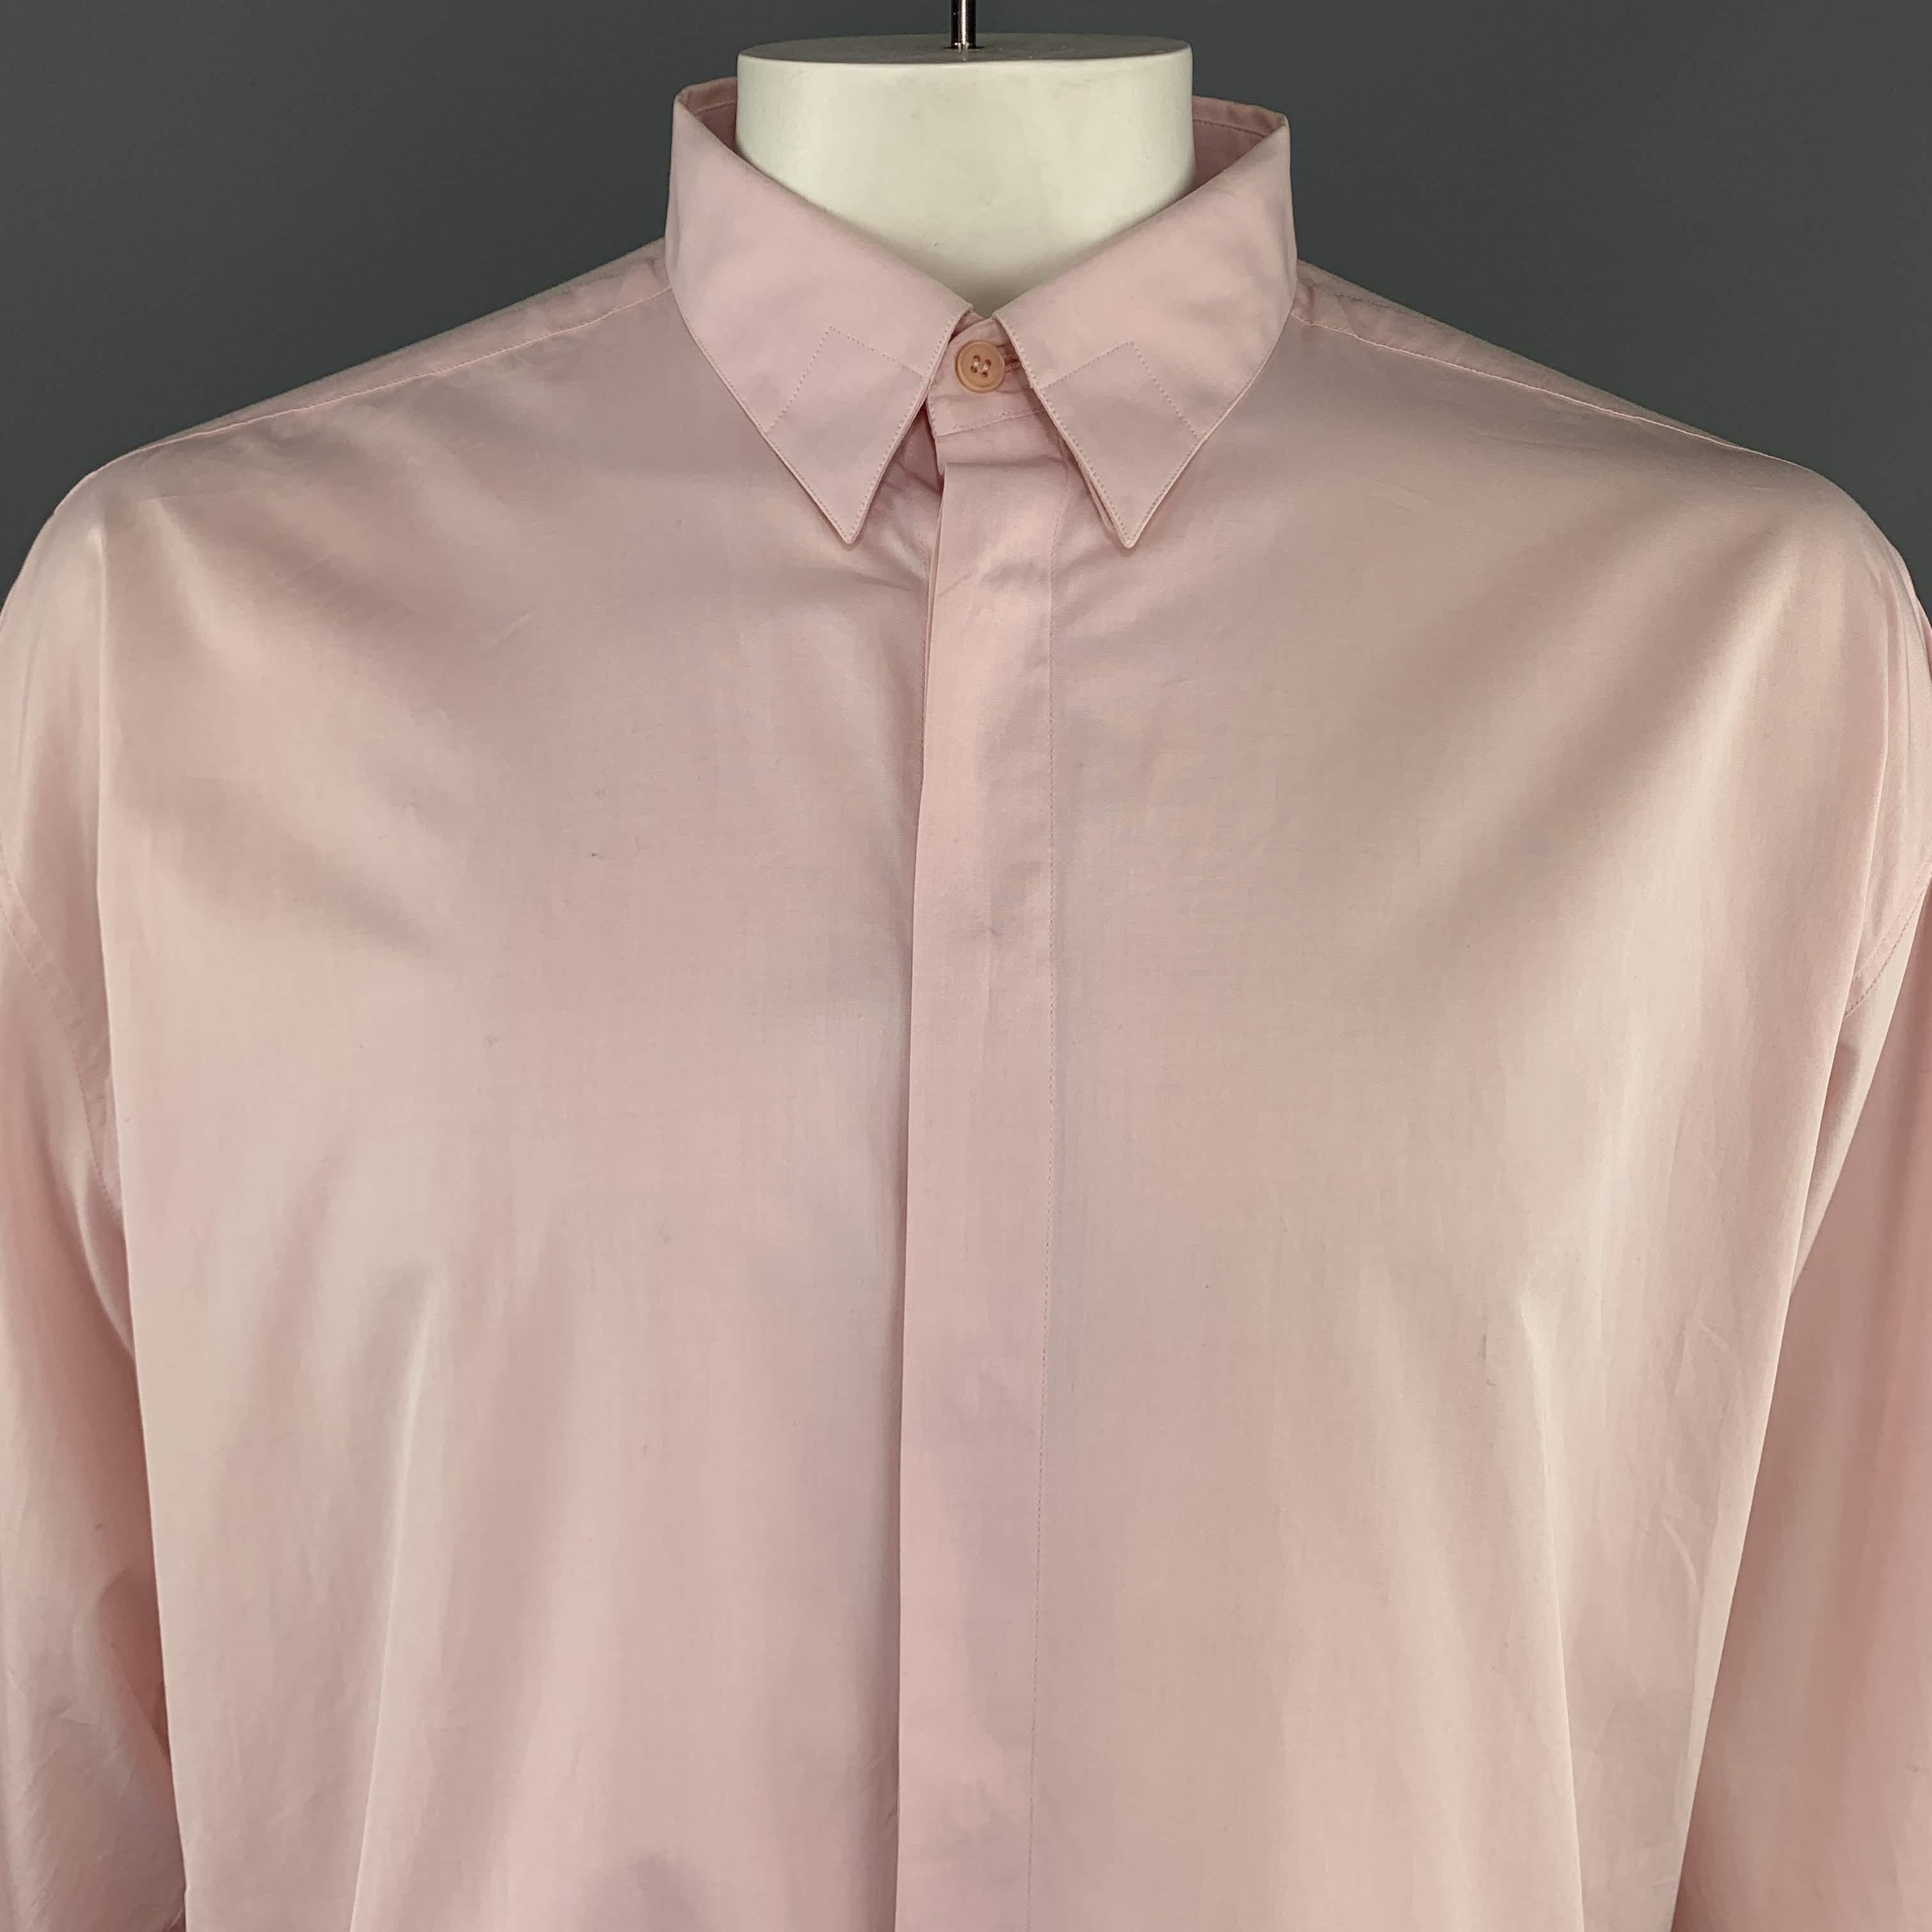 Vintage GIANNI VERSACE Long Sleeve Shirt comes a pink tone in a solid cotton material, with hidden buttons, buttoned cuffs, button down. Made in Italy.
 
Brand New.
Marked: IT 54
 
Measurements:
Shoulder: 22.5 in.
Chest: 54 in.
Sleeve: 23.5